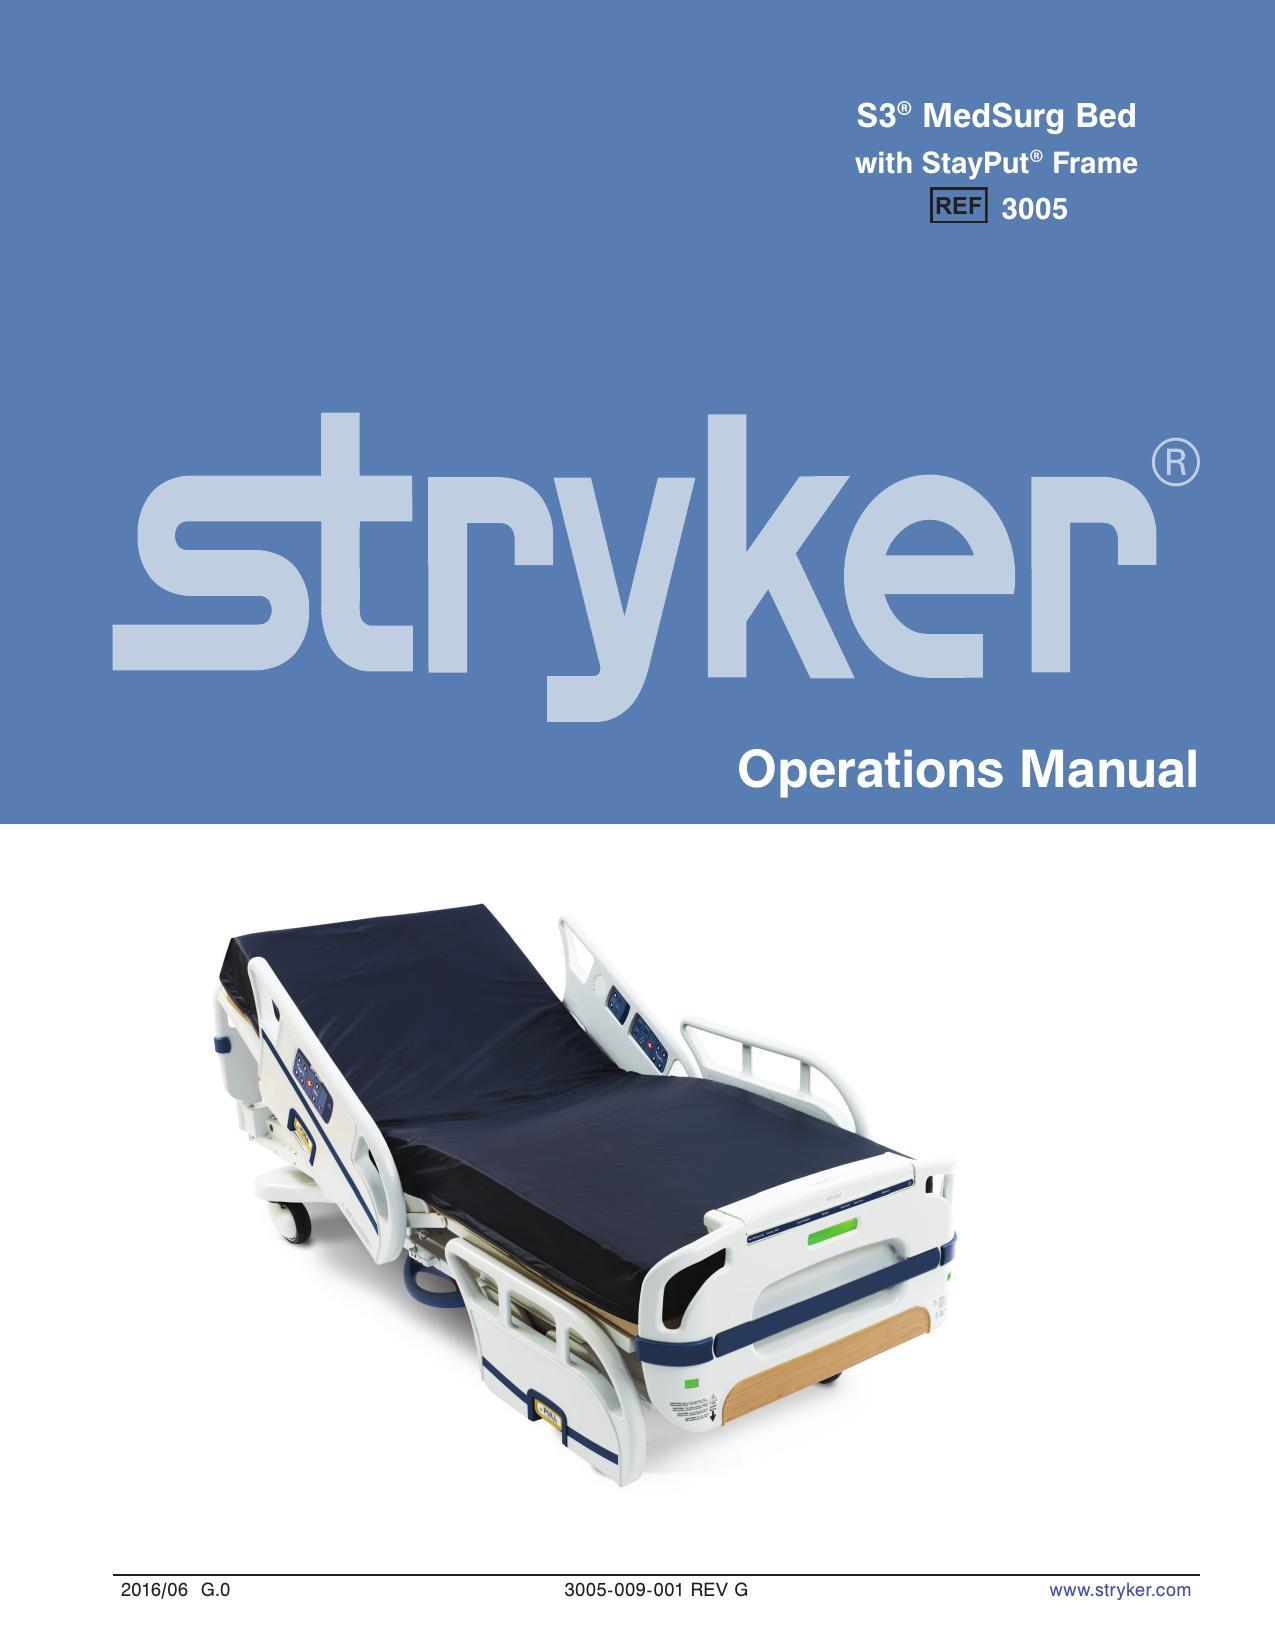 stryker-operations-manual-s30-medsurg-bed-with-staypute-frame-refi-3005.pdf